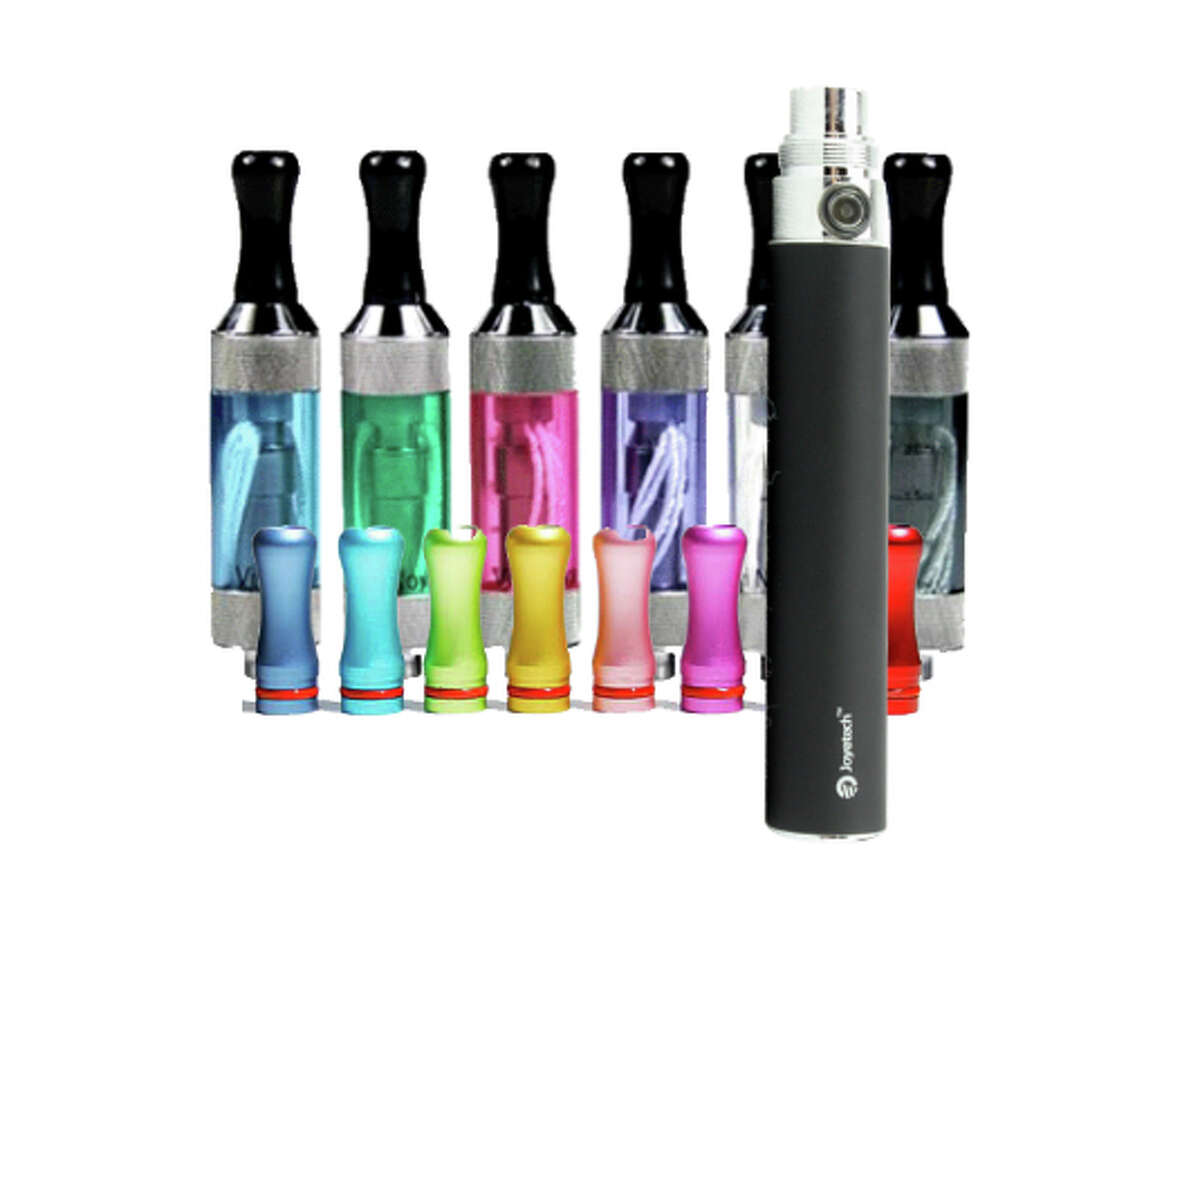 Liquid nicotine often comes in brightly colored refill packages and in candy flavors, causing kids to taste the contents of the refill packages, leading to nicotine poisoning. Kids can experience vomiting and increased heart rate. More than 3,300 people have called poison-control centers this year to report exposure to e-cigarettes and liquid nicotine; more than half were children younger than 6. Keep them locked up or out of reach of children and dispose of them properly. If swallowed, contact poison control.